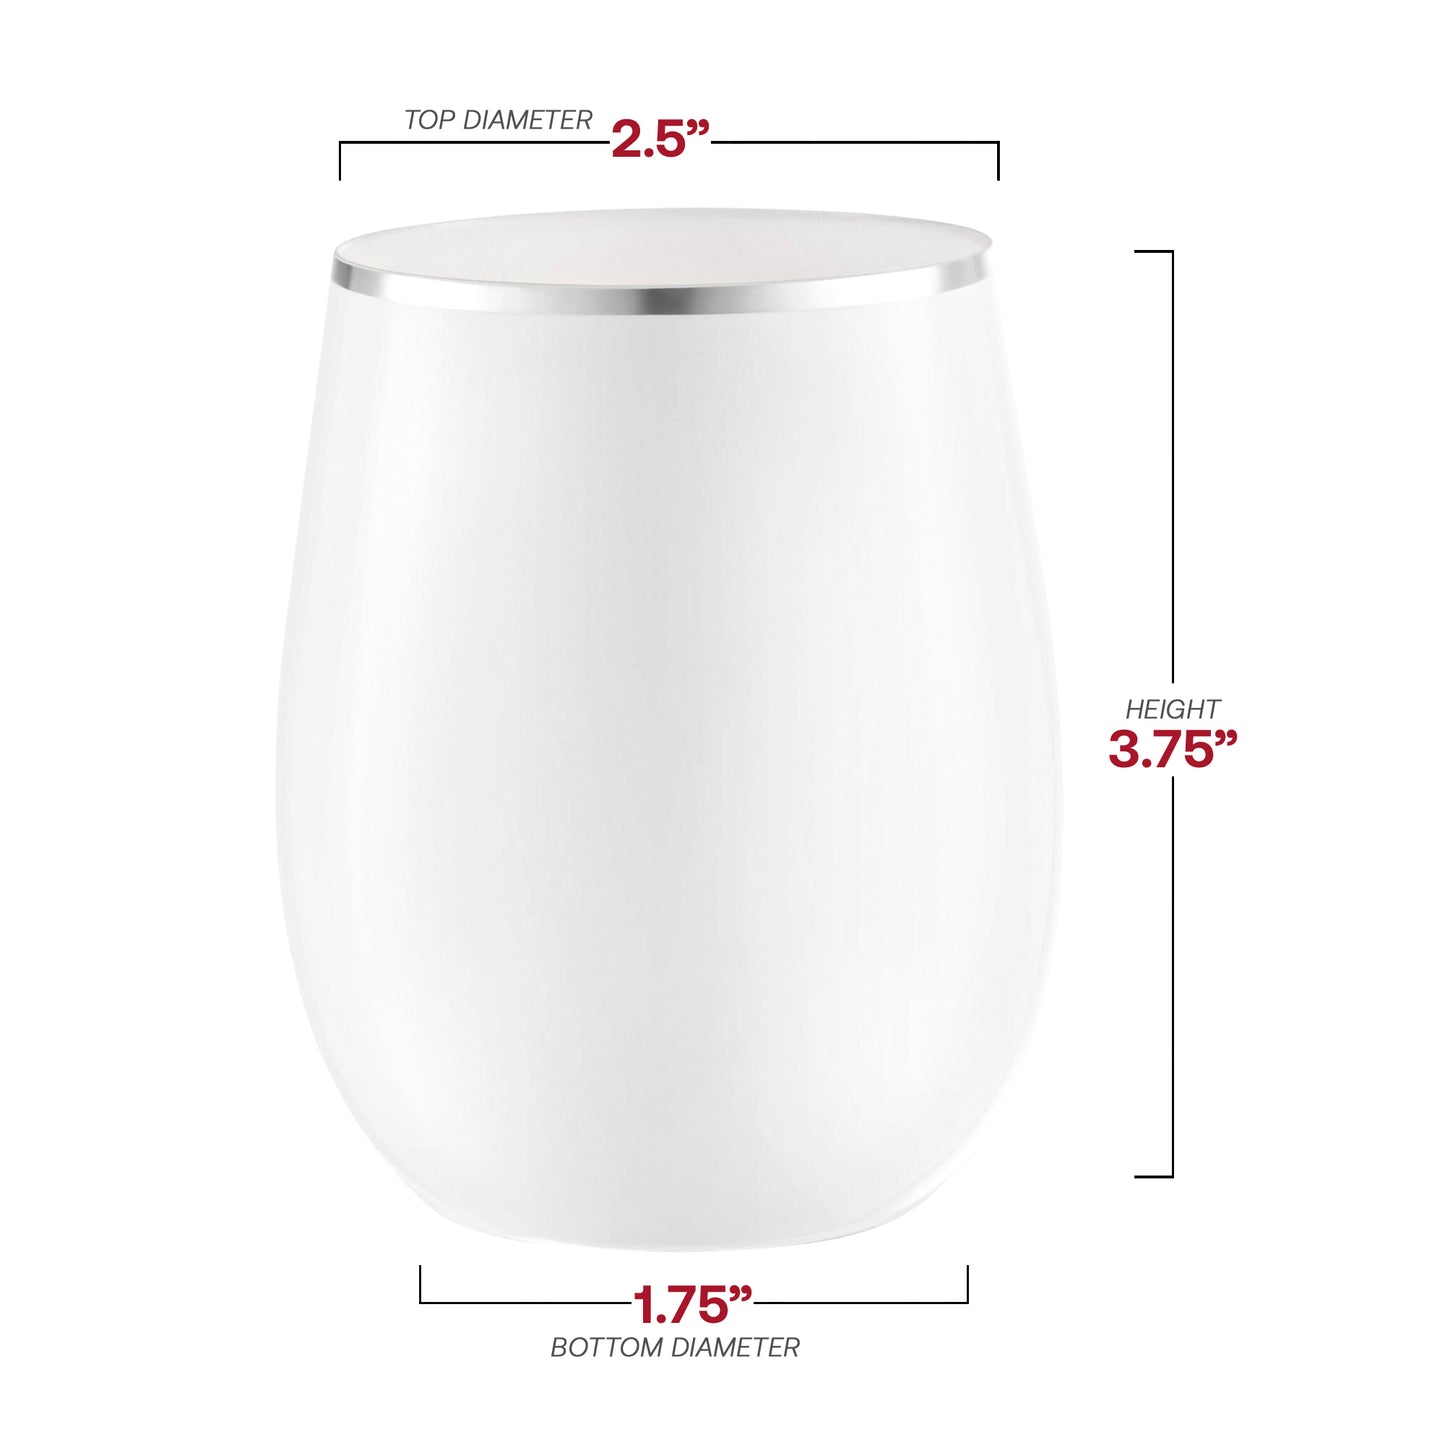 12 oz. White with Silver Elegant Stemless Disposable Plastic Wine Glasses Dimension | The Kaya Collection